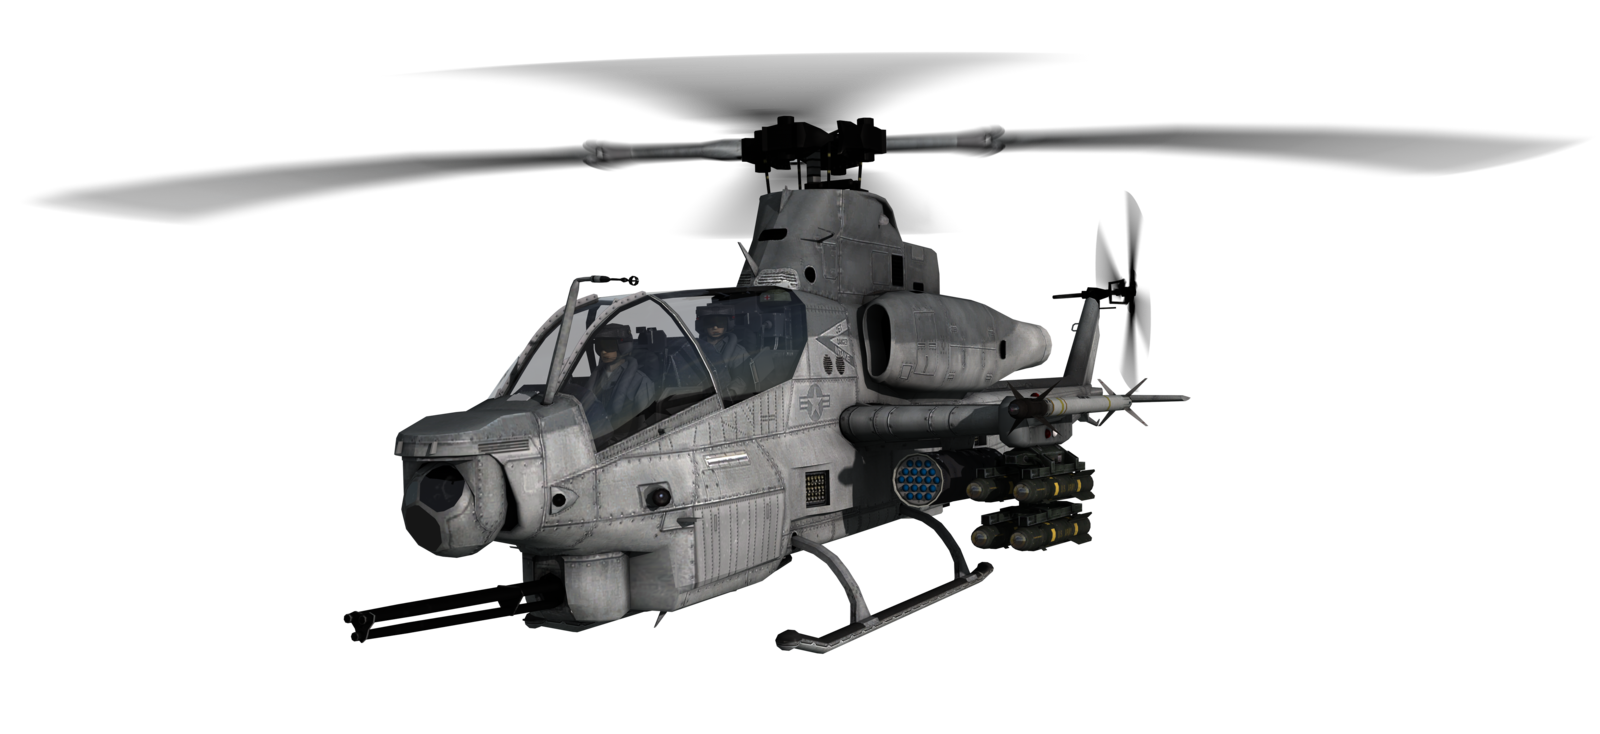 Download PNG image - Helicopt